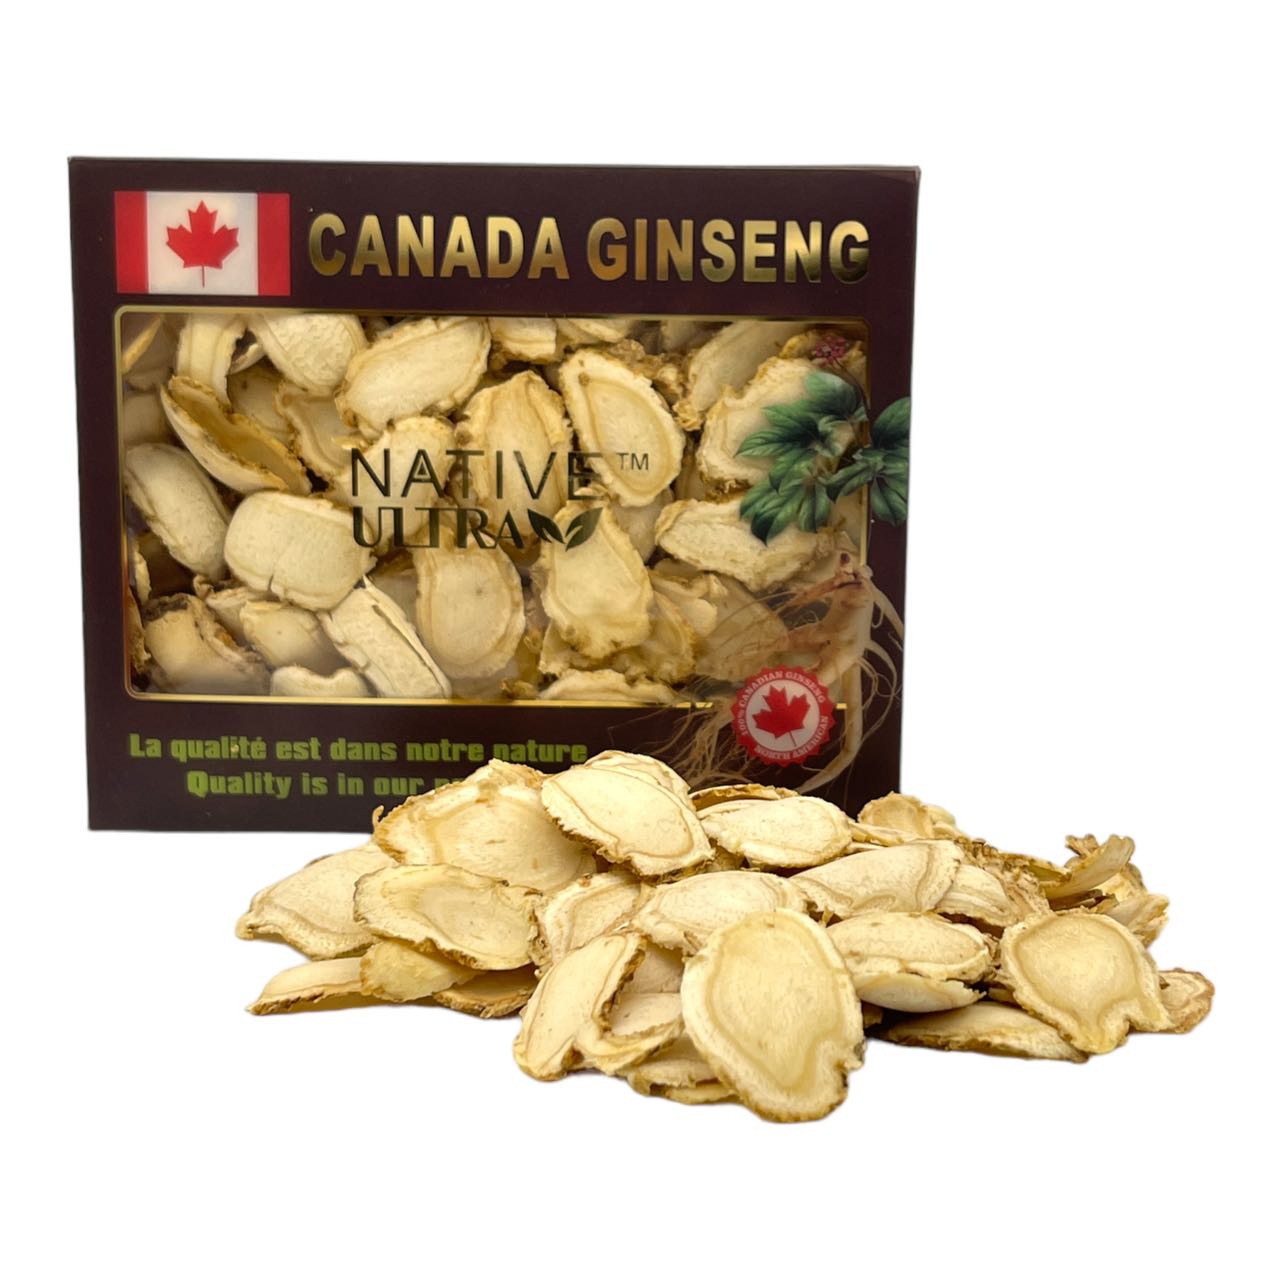 "NATIVE ULTRA" Canadian Ginseng Slices, 80g/box